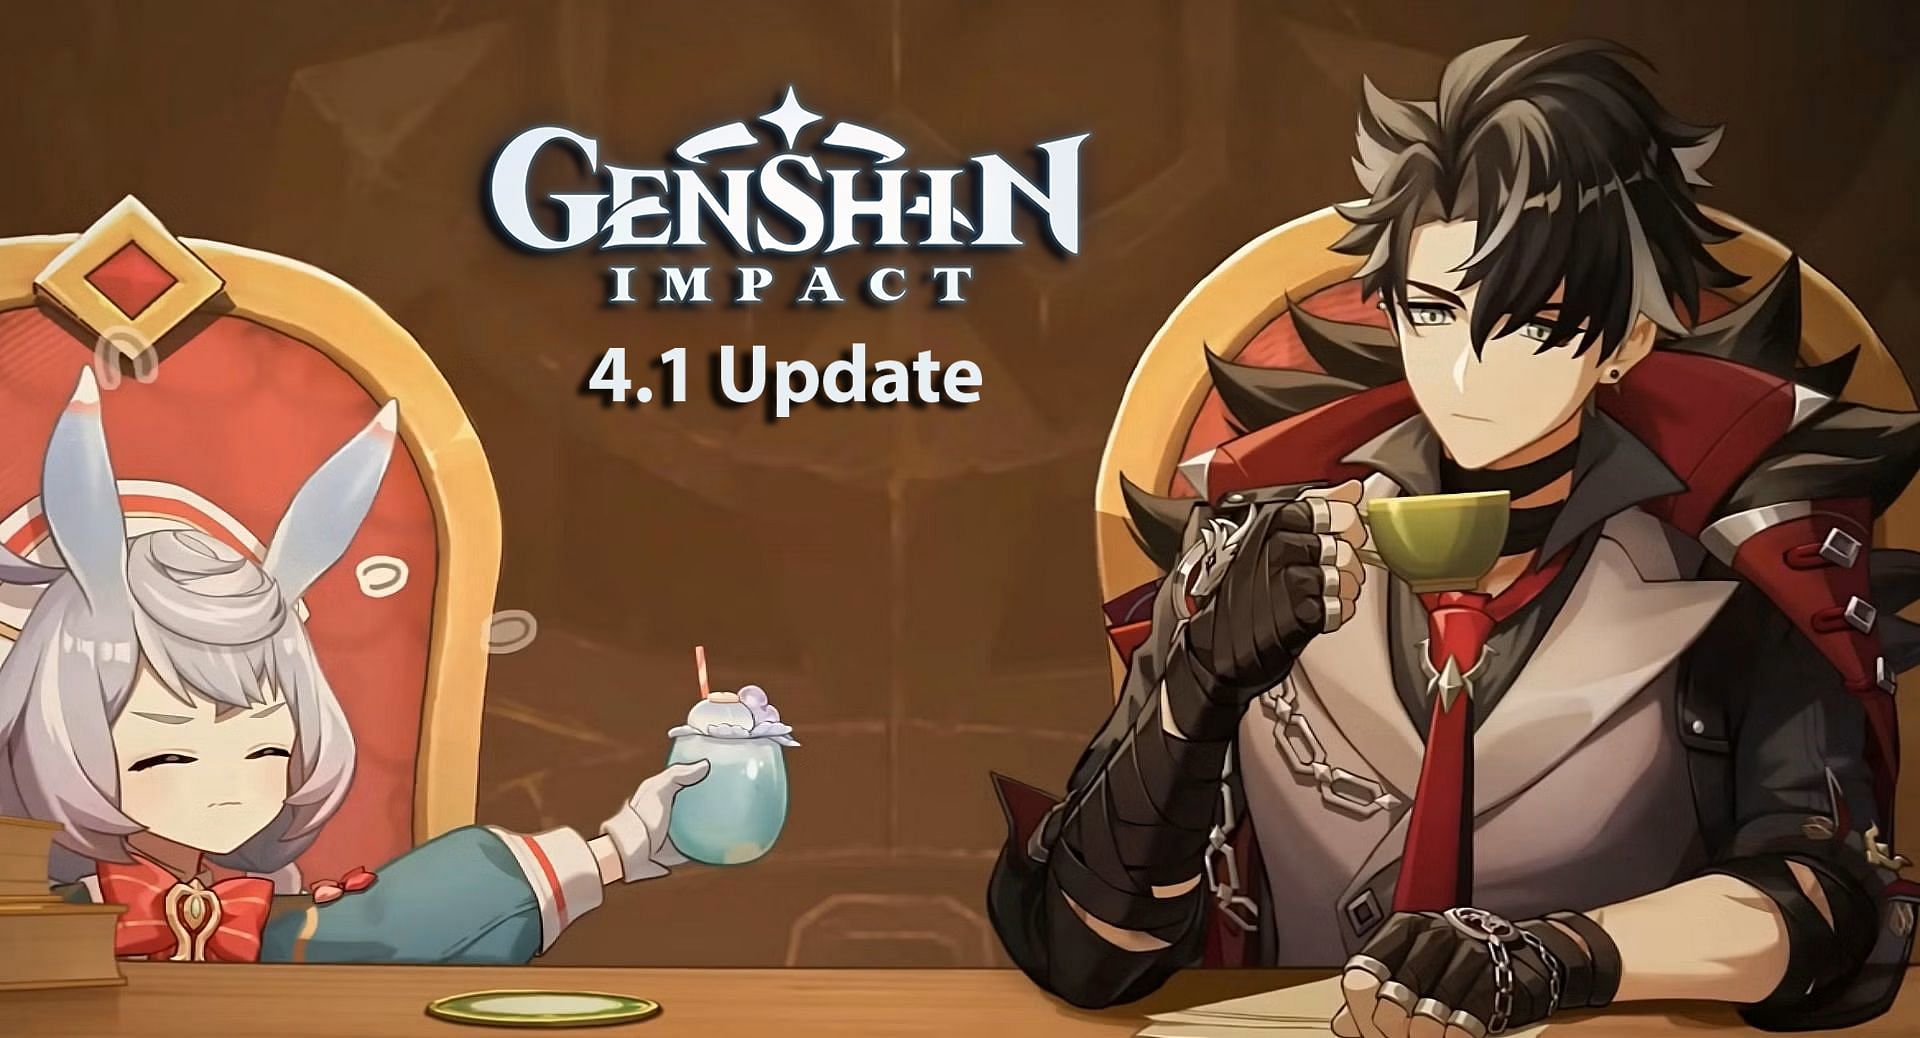 What time does the Genshin Impact 4.1 Livestream start?